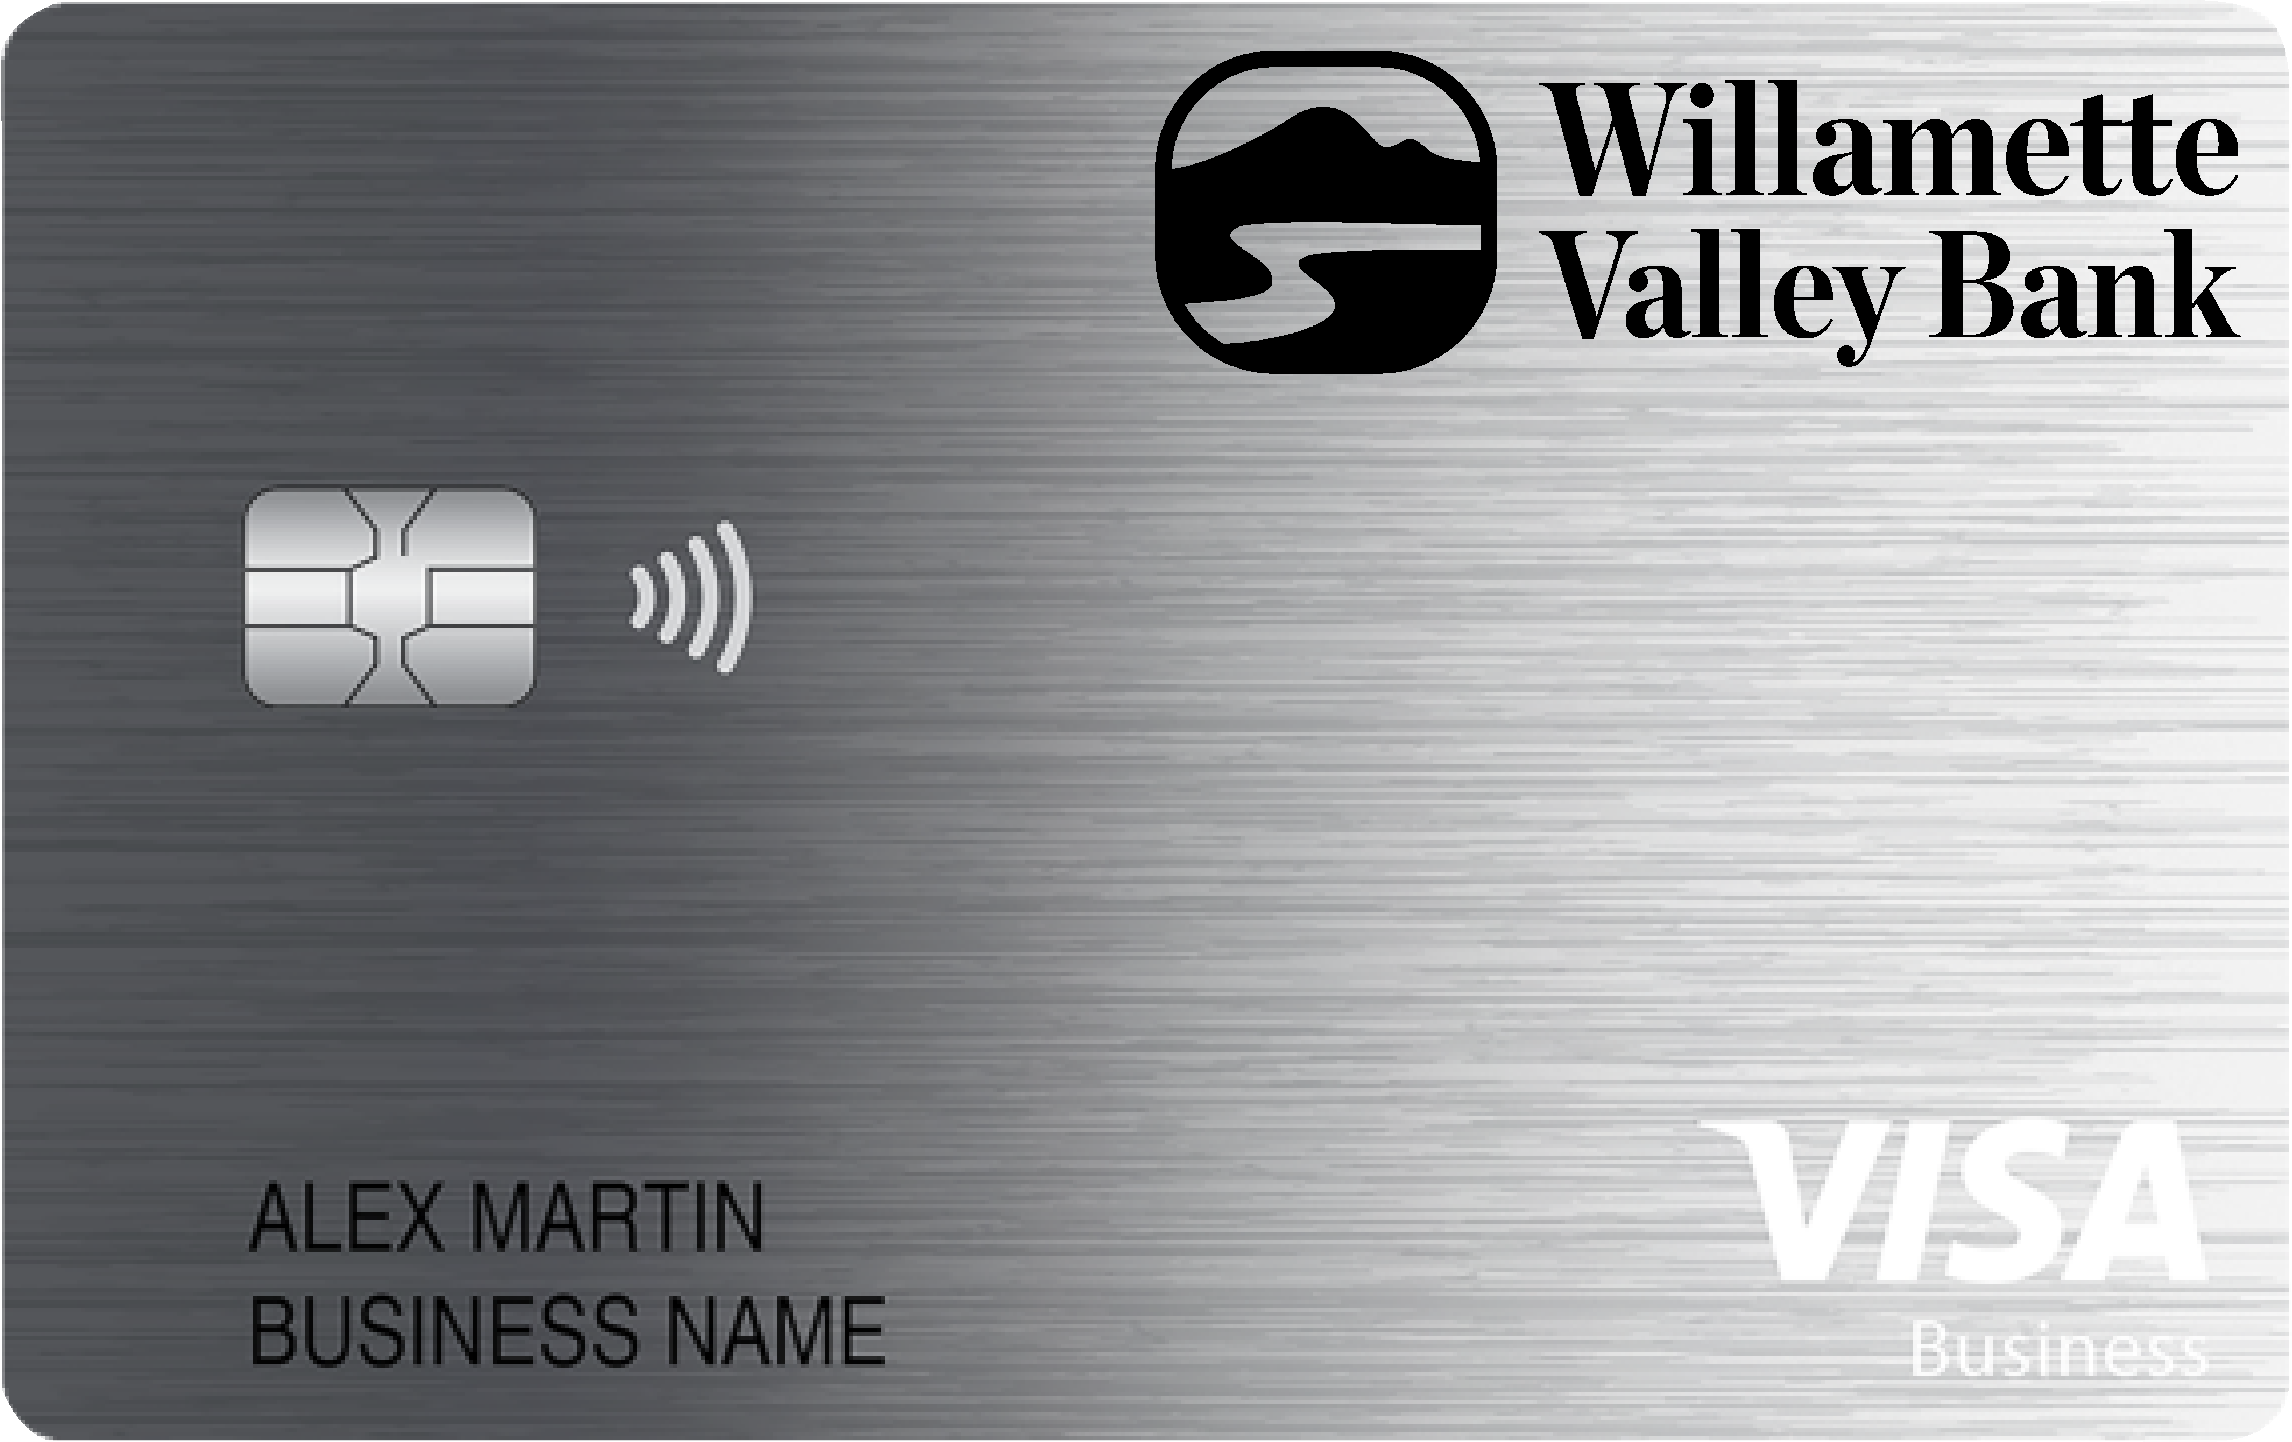 Willamette Valley Bank Business Card Card